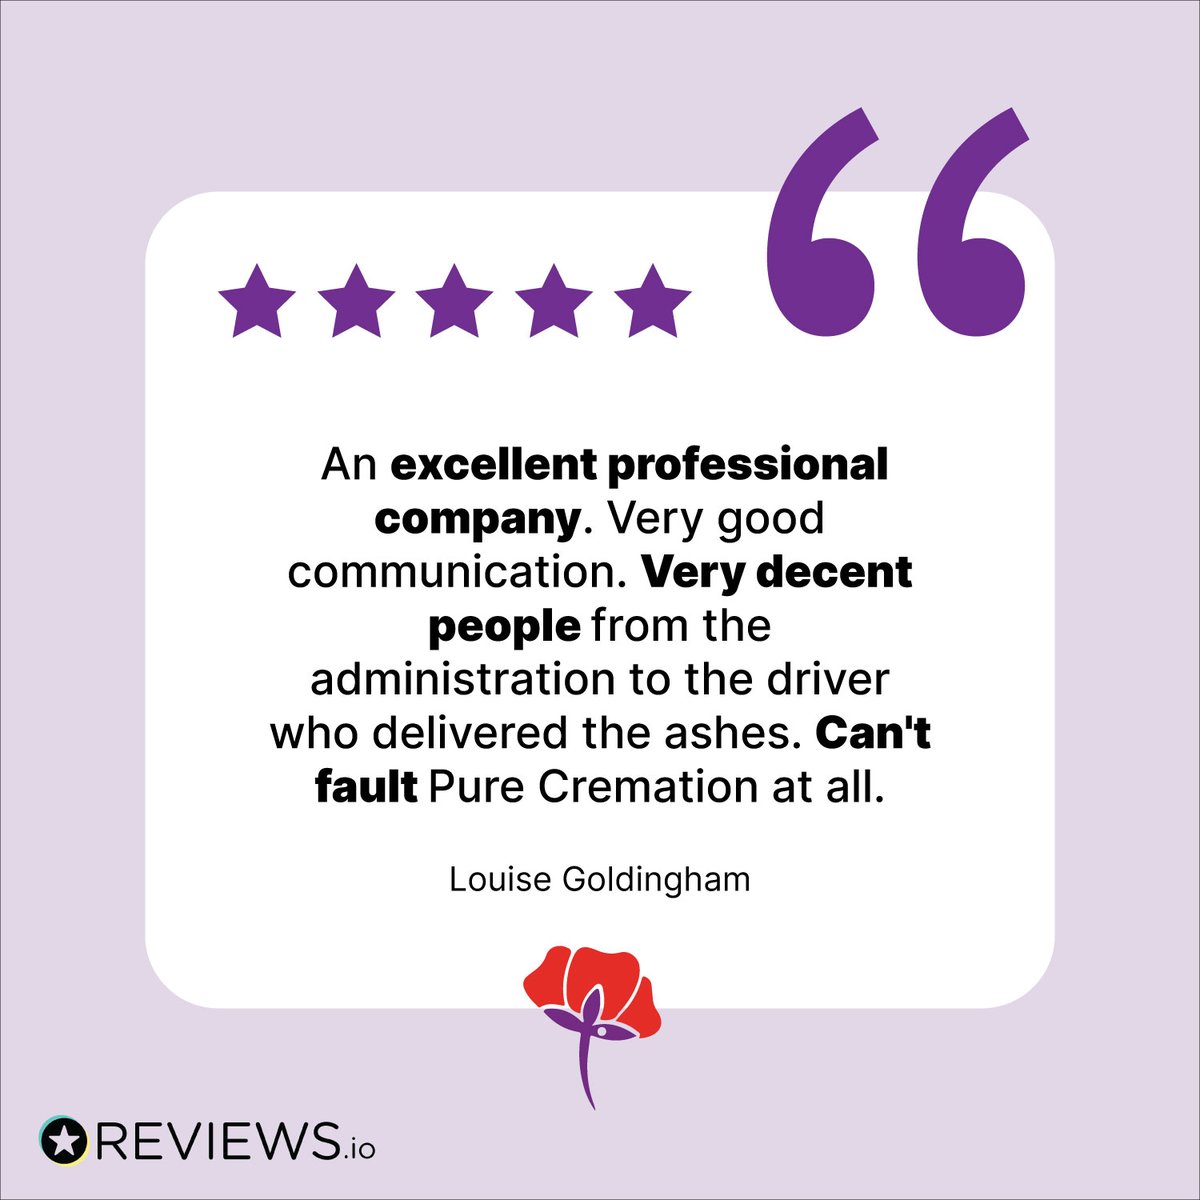 We are thrilled to share this wonderful review, thank you Louise ❤ #PureCremationReview